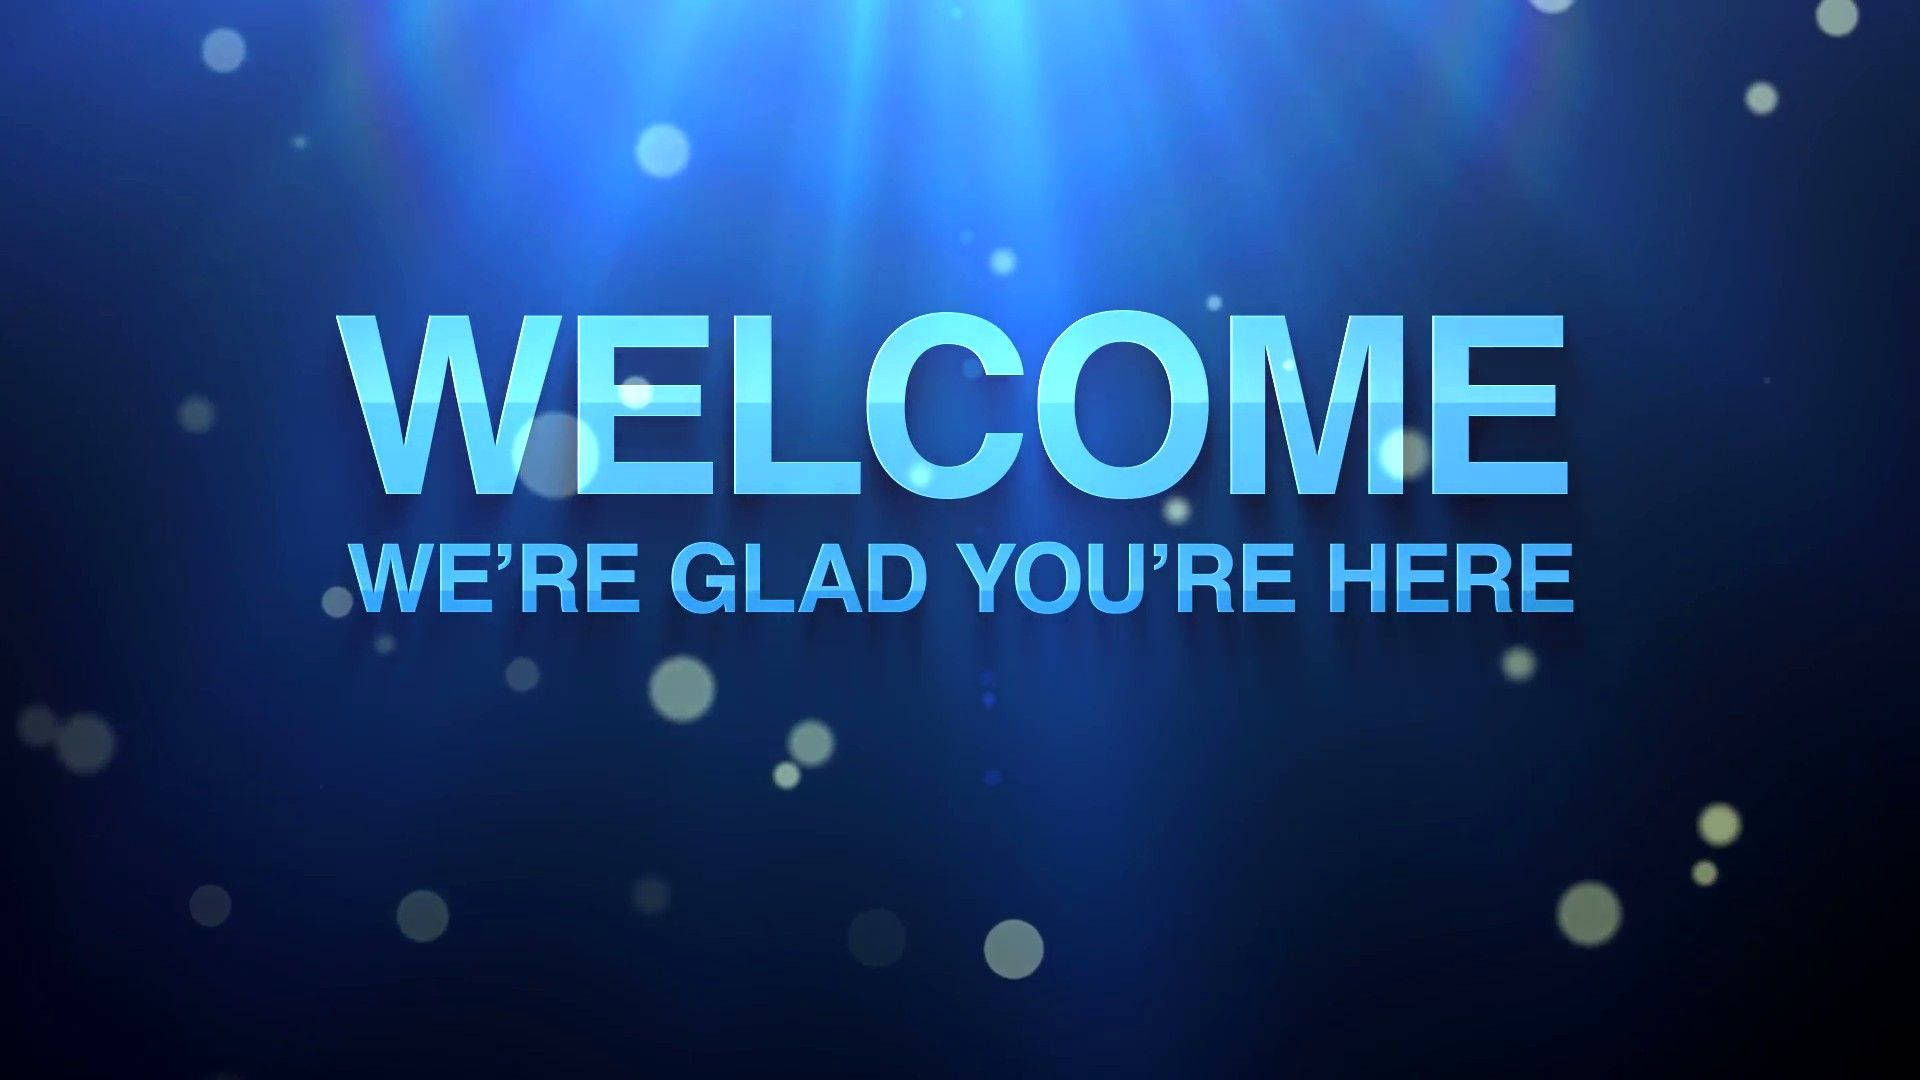 Free Welcome Wallpaper Downloads, [100+] Welcome Wallpapers for FREE |  